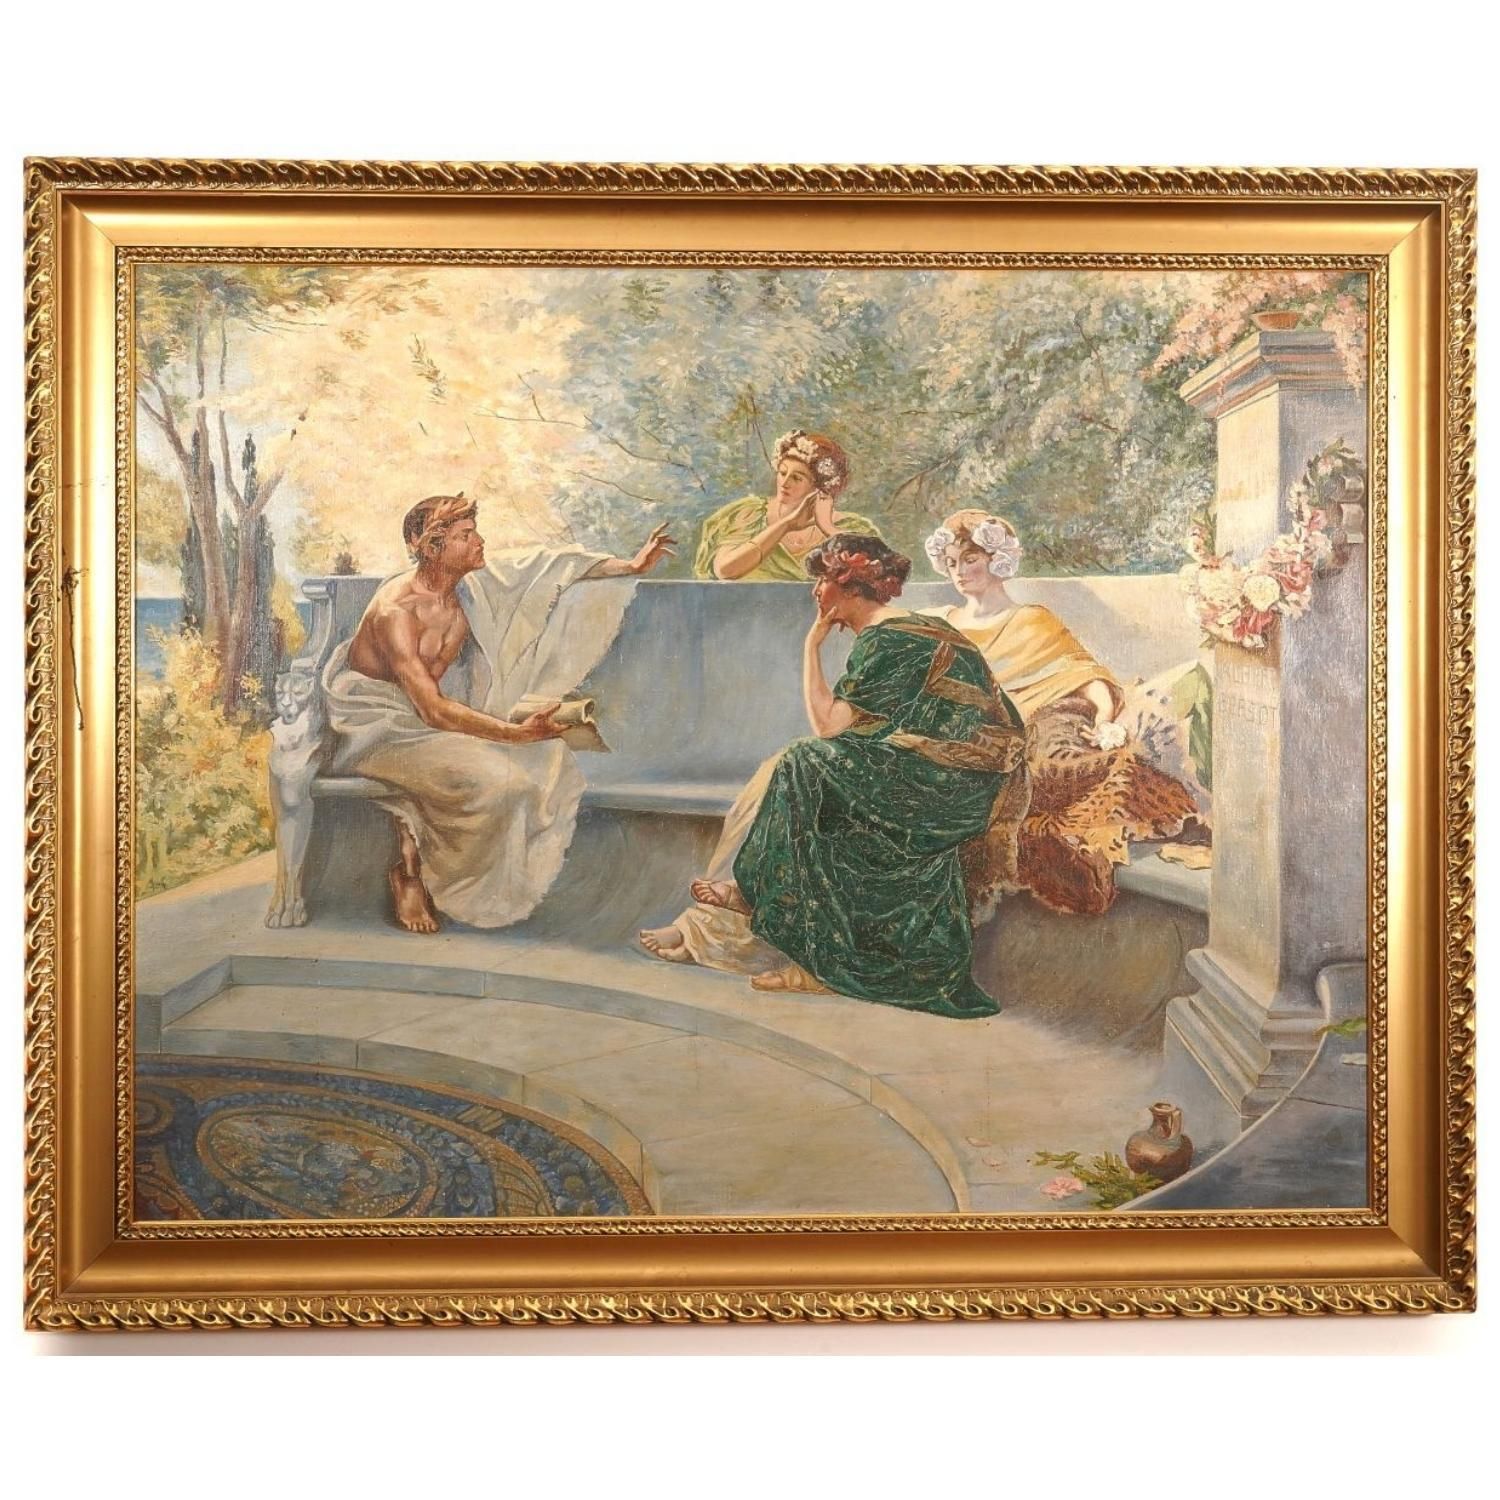 ALBERT BERSOT ALBERT BERSOT

Poet and muses

Oil on canvas, signed right in the &hellip;